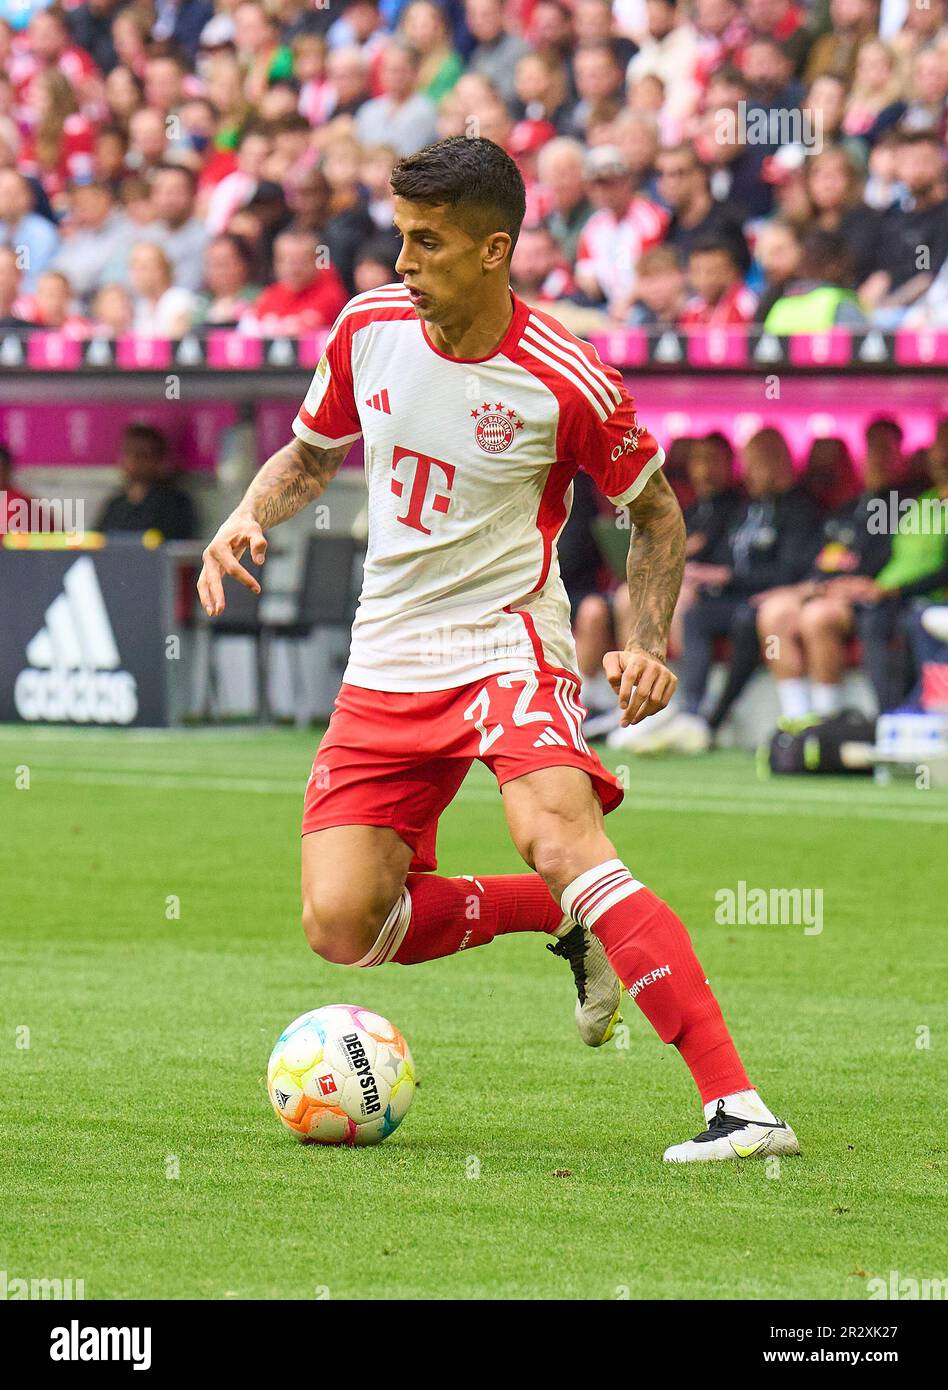 Joao Cancelo, FCB 22  in the match FC BAYERN MUENCHEN - RB LEIPZIG 1-3 1.German Football League on May 20, 2023 in Munich, Germany. Season 2022/2023, matchday 33, 1.Bundesliga, FCB, München, 33.Spieltag. © Peter Schatz / Alamy Live News    - DFL REGULATIONS PROHIBIT ANY USE OF PHOTOGRAPHS as IMAGE SEQUENCES and/or QUASI-VIDEO - Stock Photo